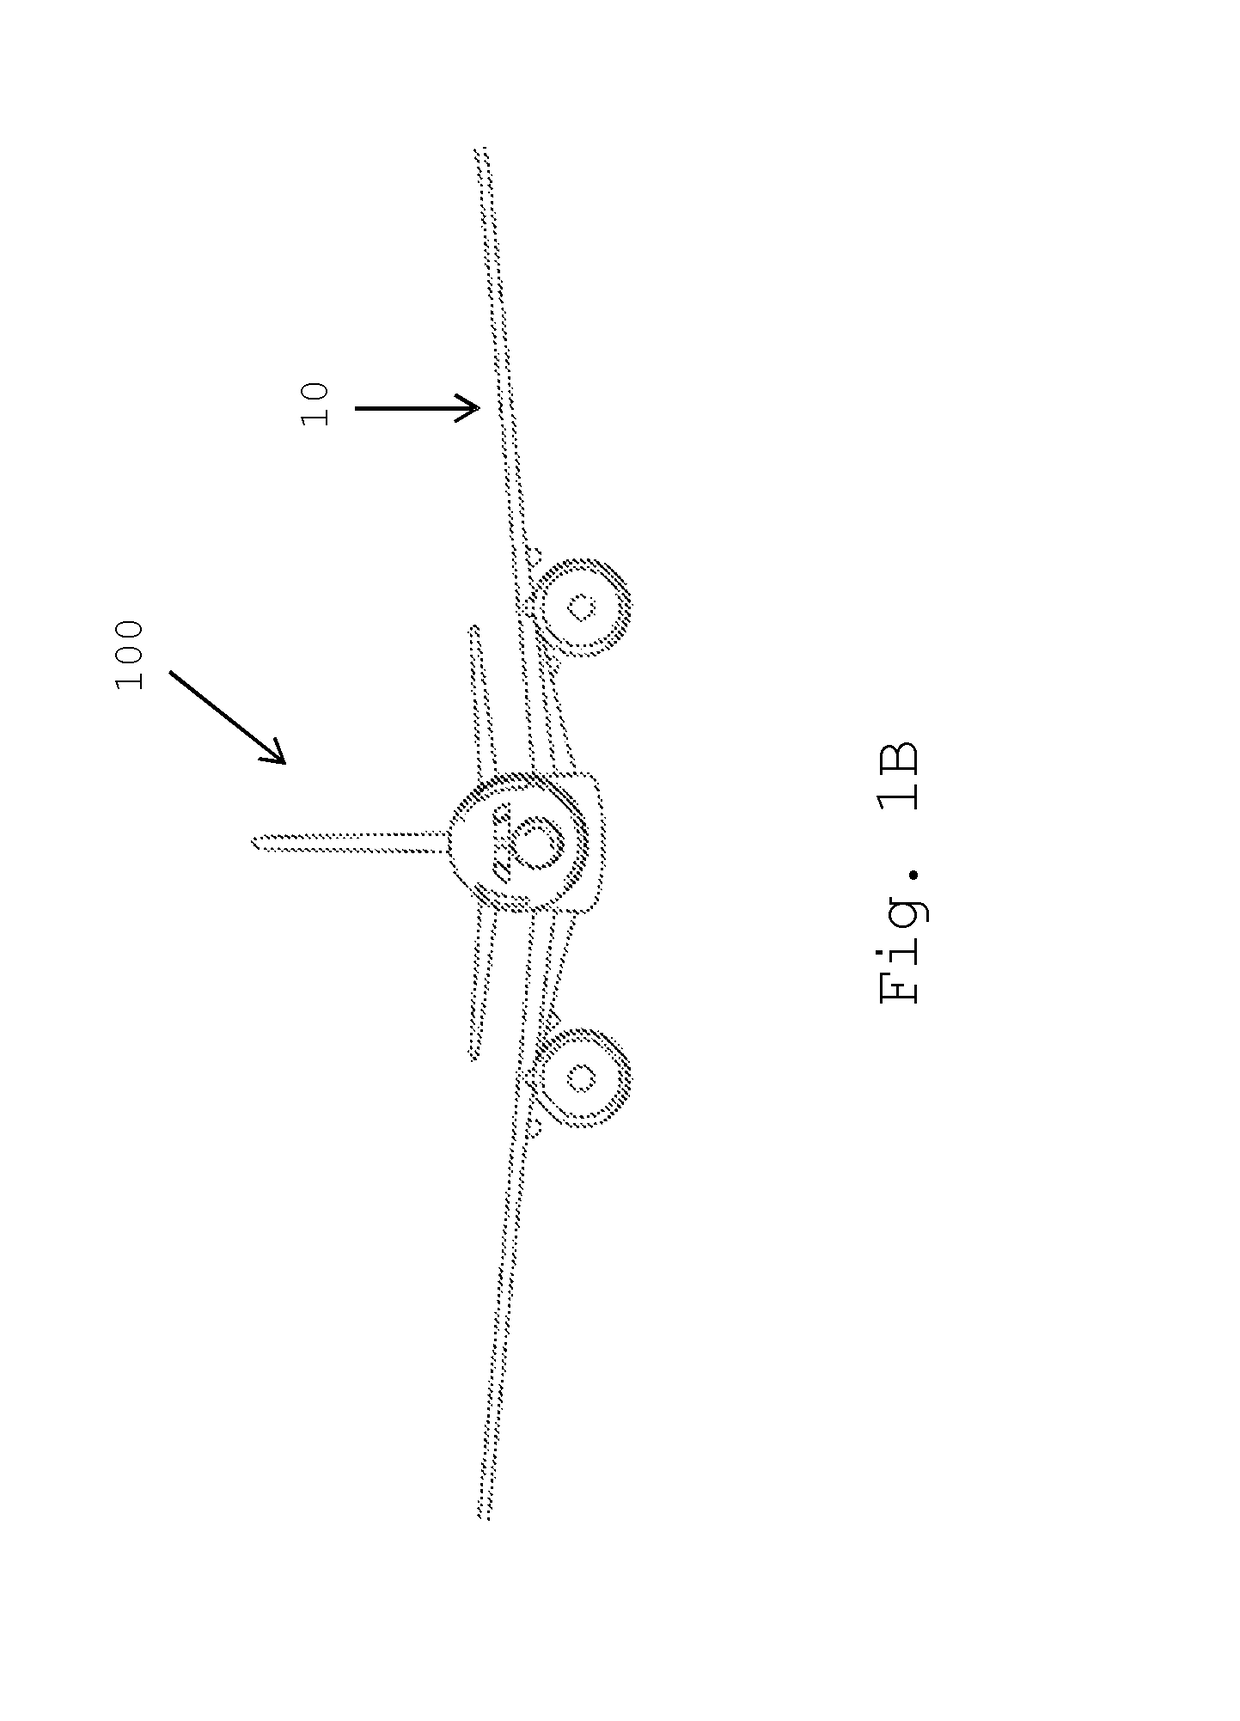 Folding wing tip and rotating locking device